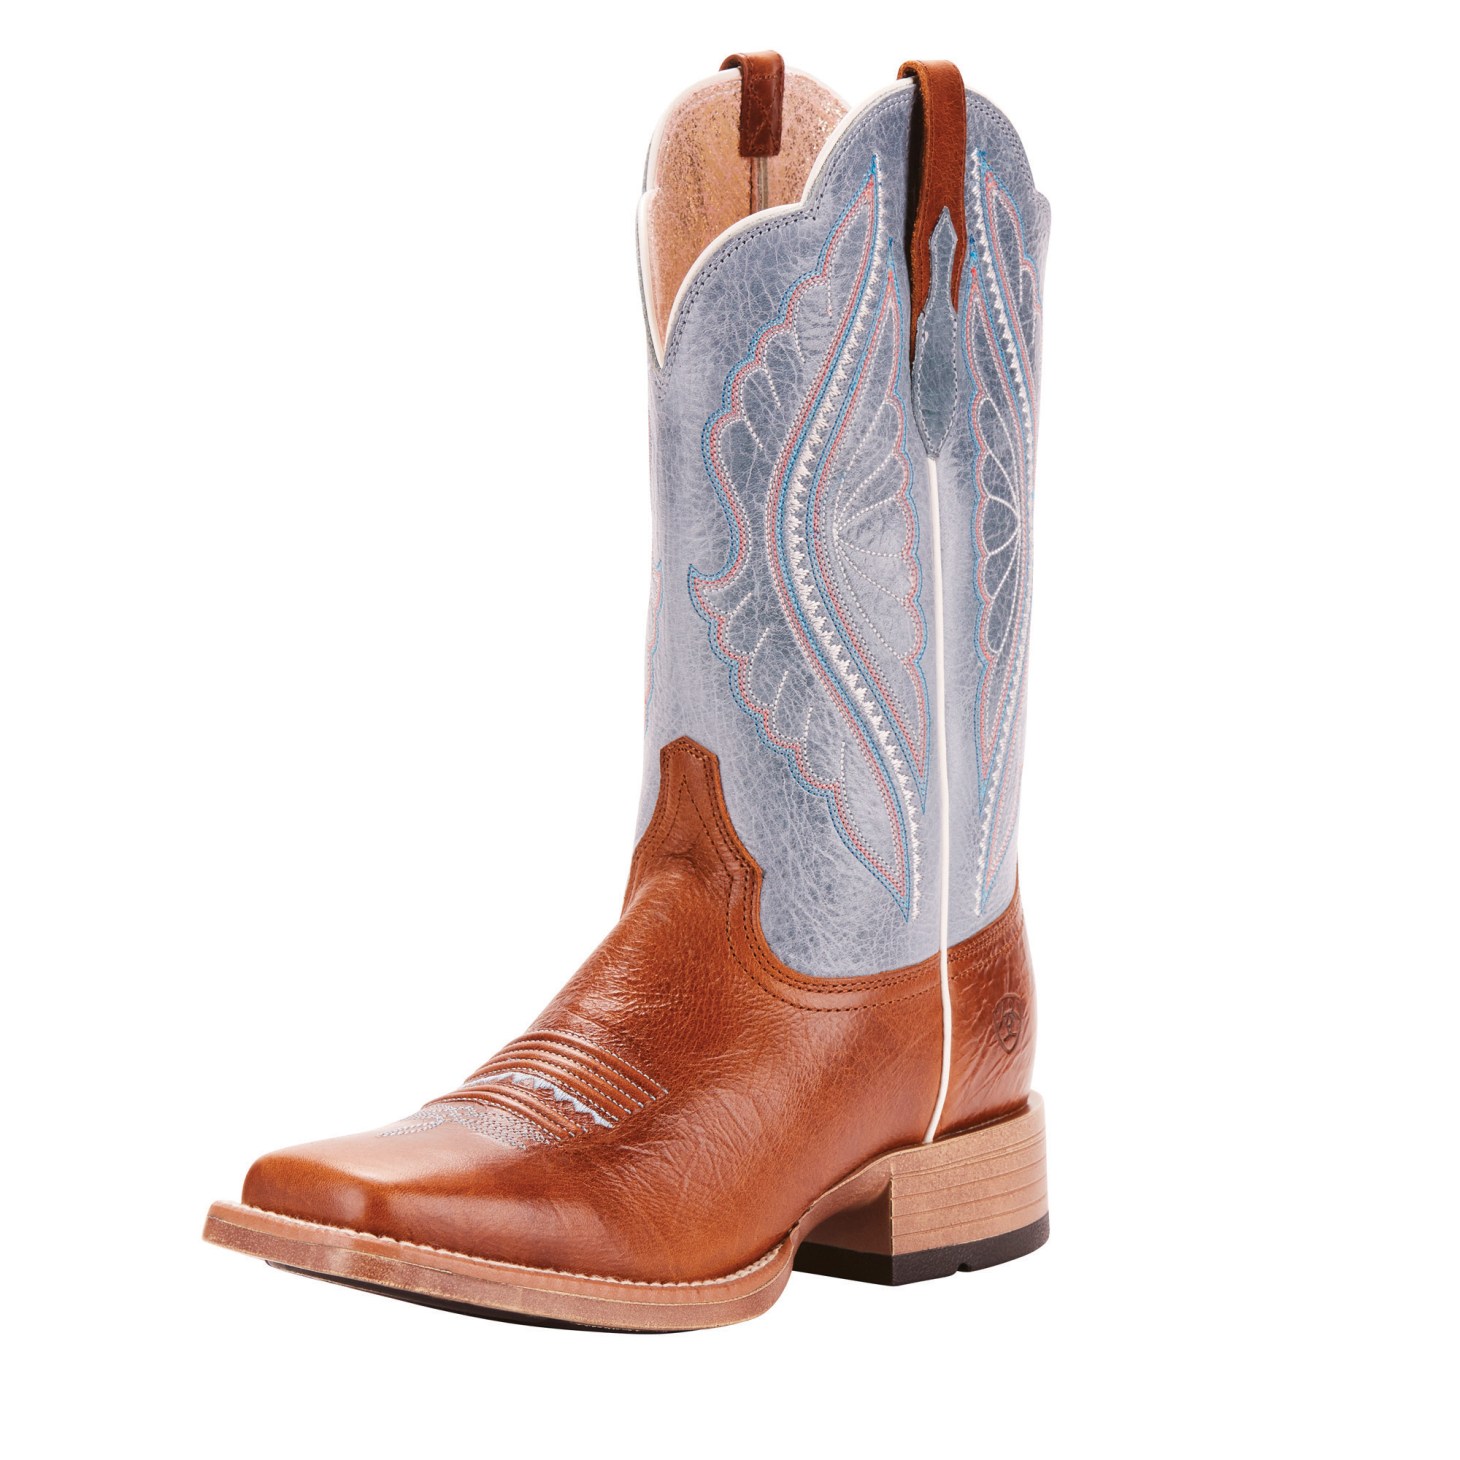 Ariat prime time western boots